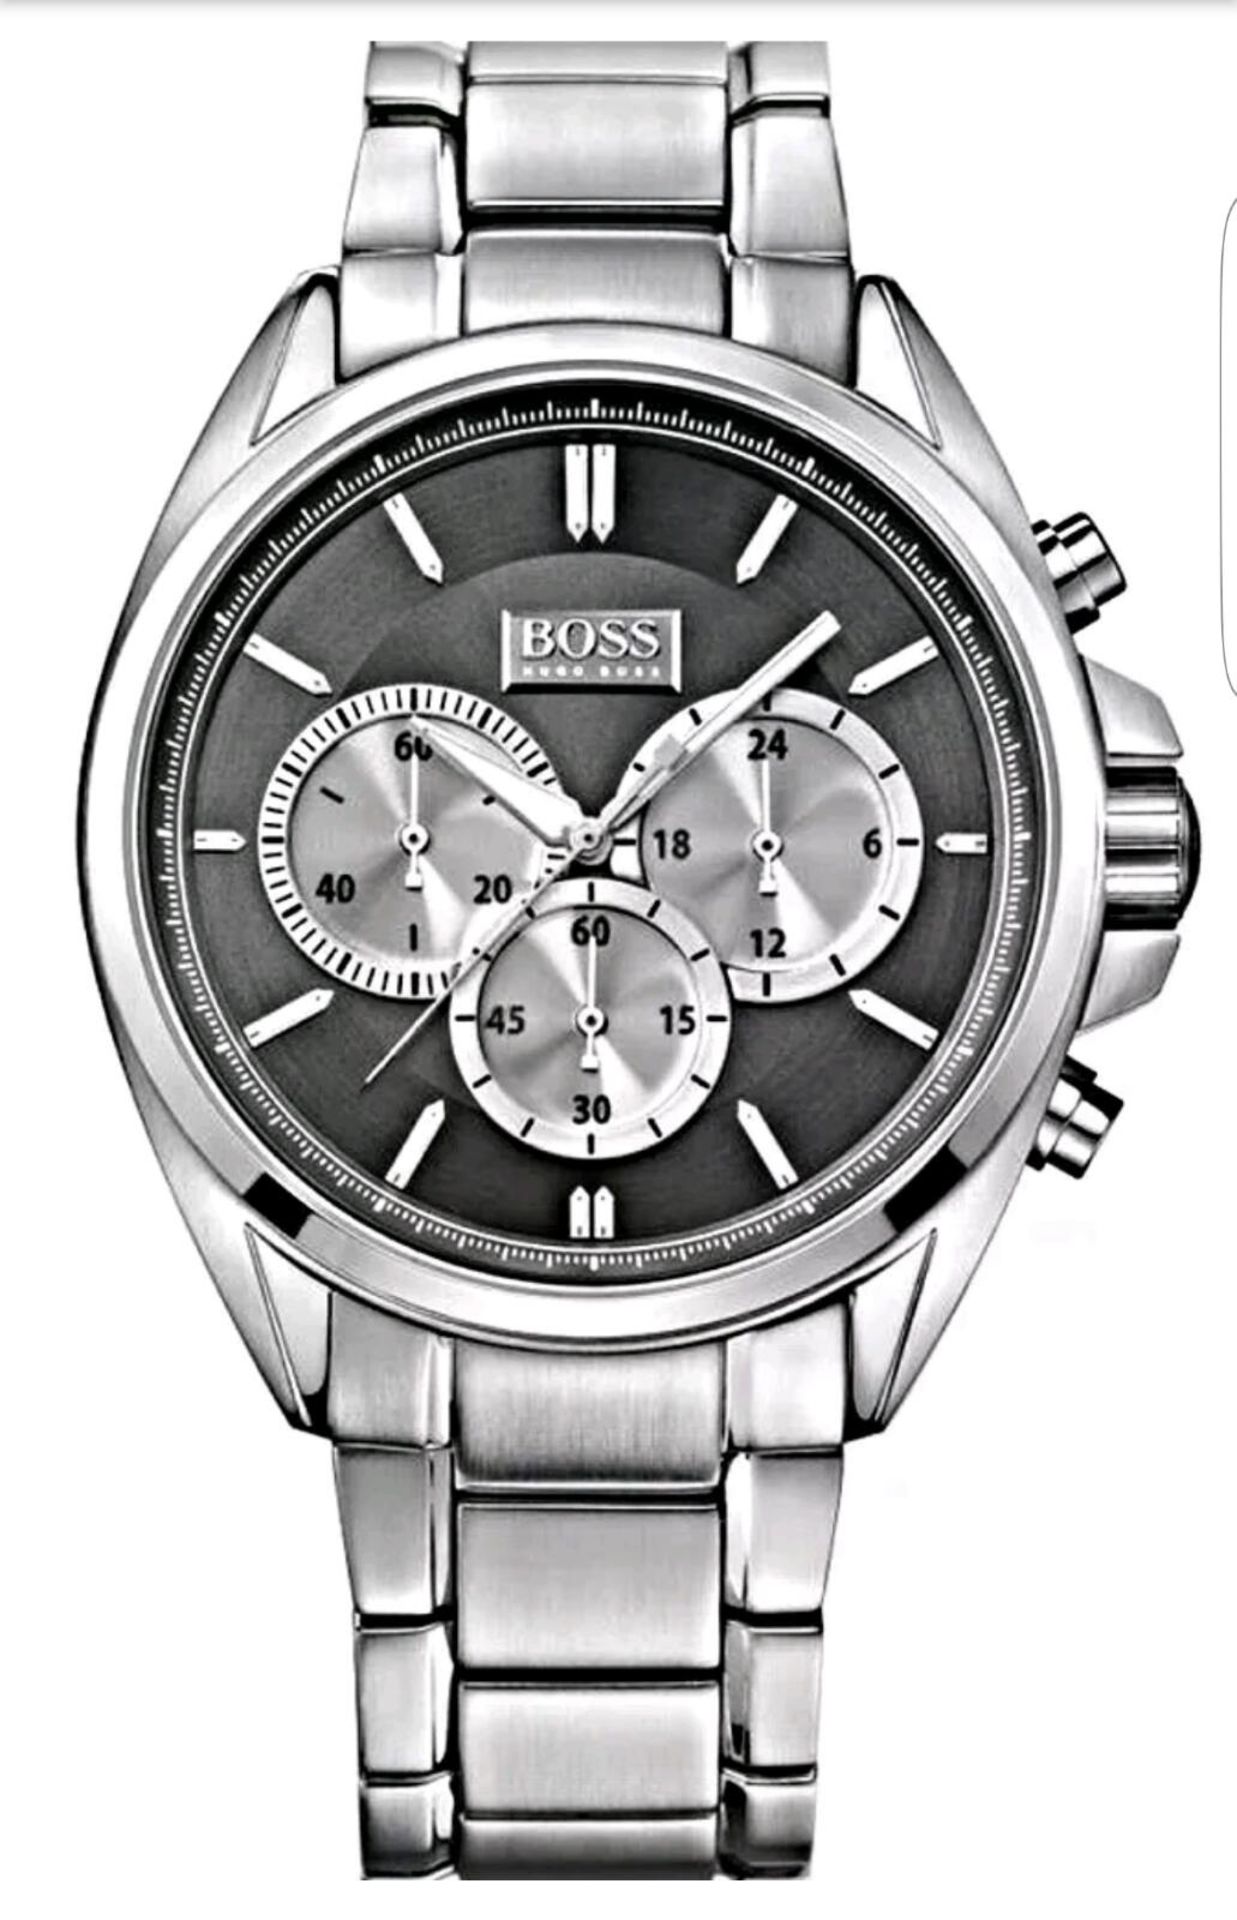 BRAND NEW HUGO BOSS 1512883, COMPLETE WITH ORIGINAL BOX AND MANUAL - Image 2 of 2